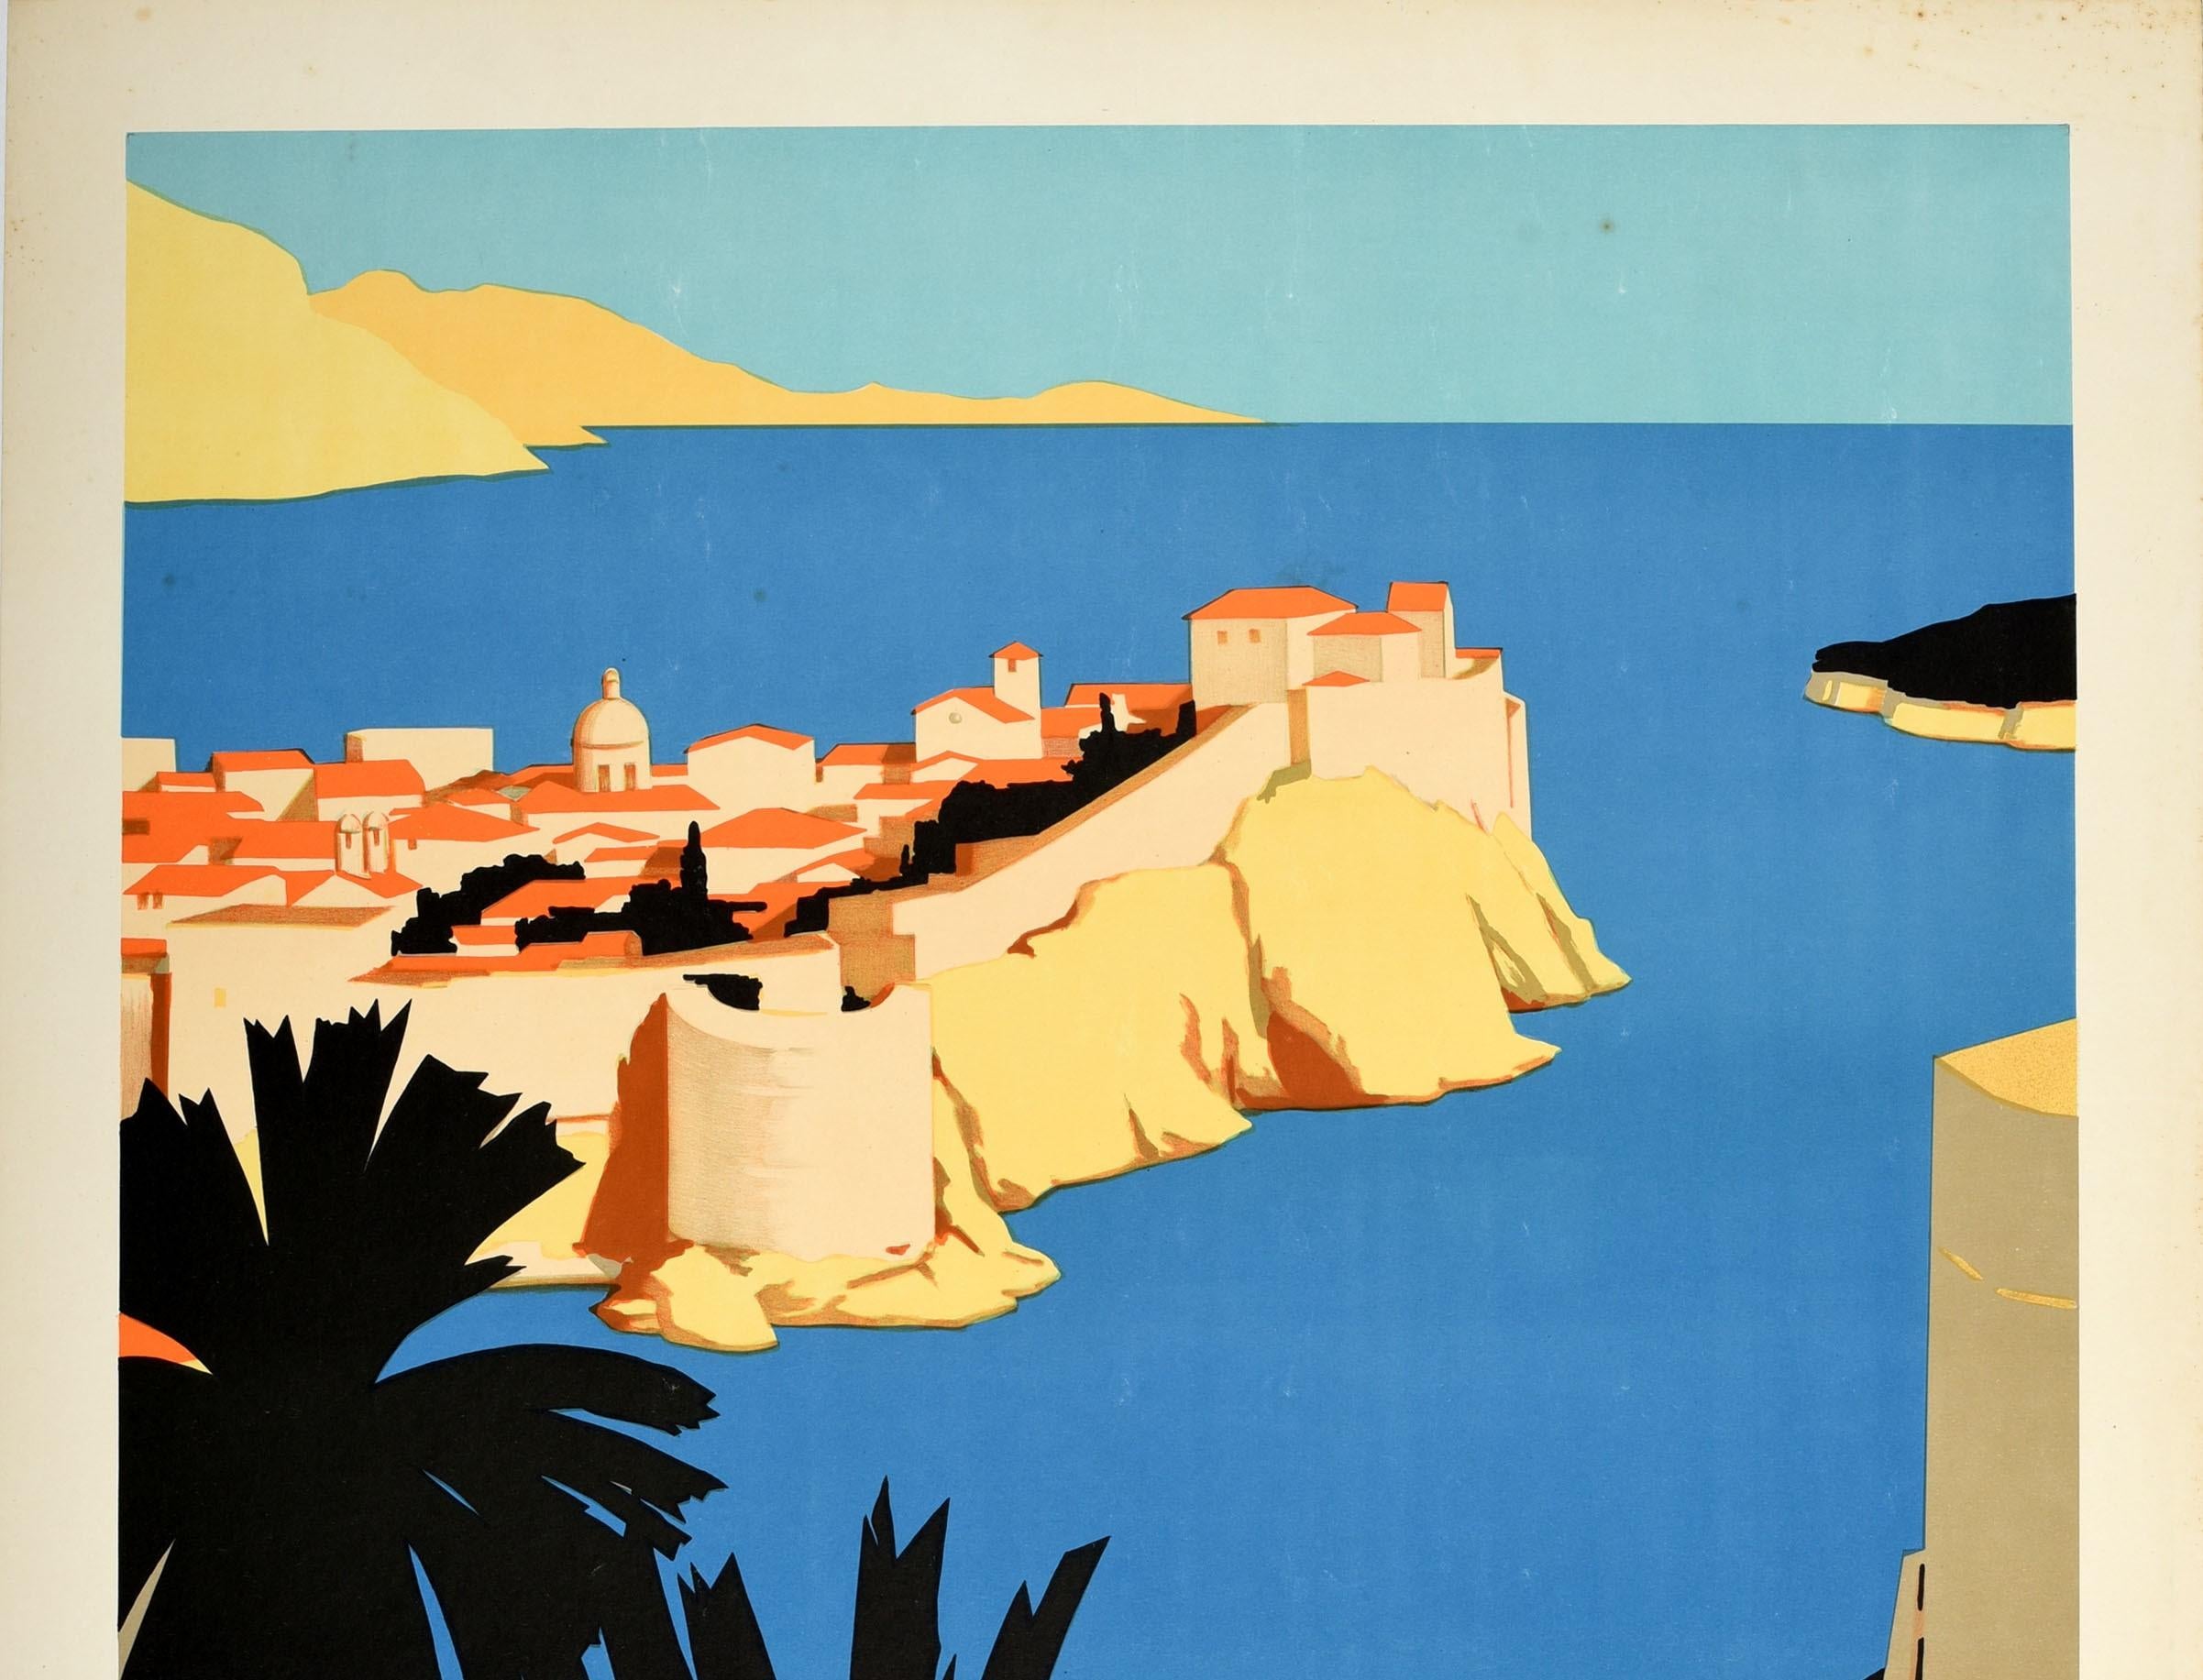 Original vintage travel advertising poster for Dubrovnik The Gem of the Jugoslav Adriatic featuring a stunning scenic view of the historic city on the clear blue sea with palm trees in the foreground and hills in the distance. Artwork by Hans Wagula